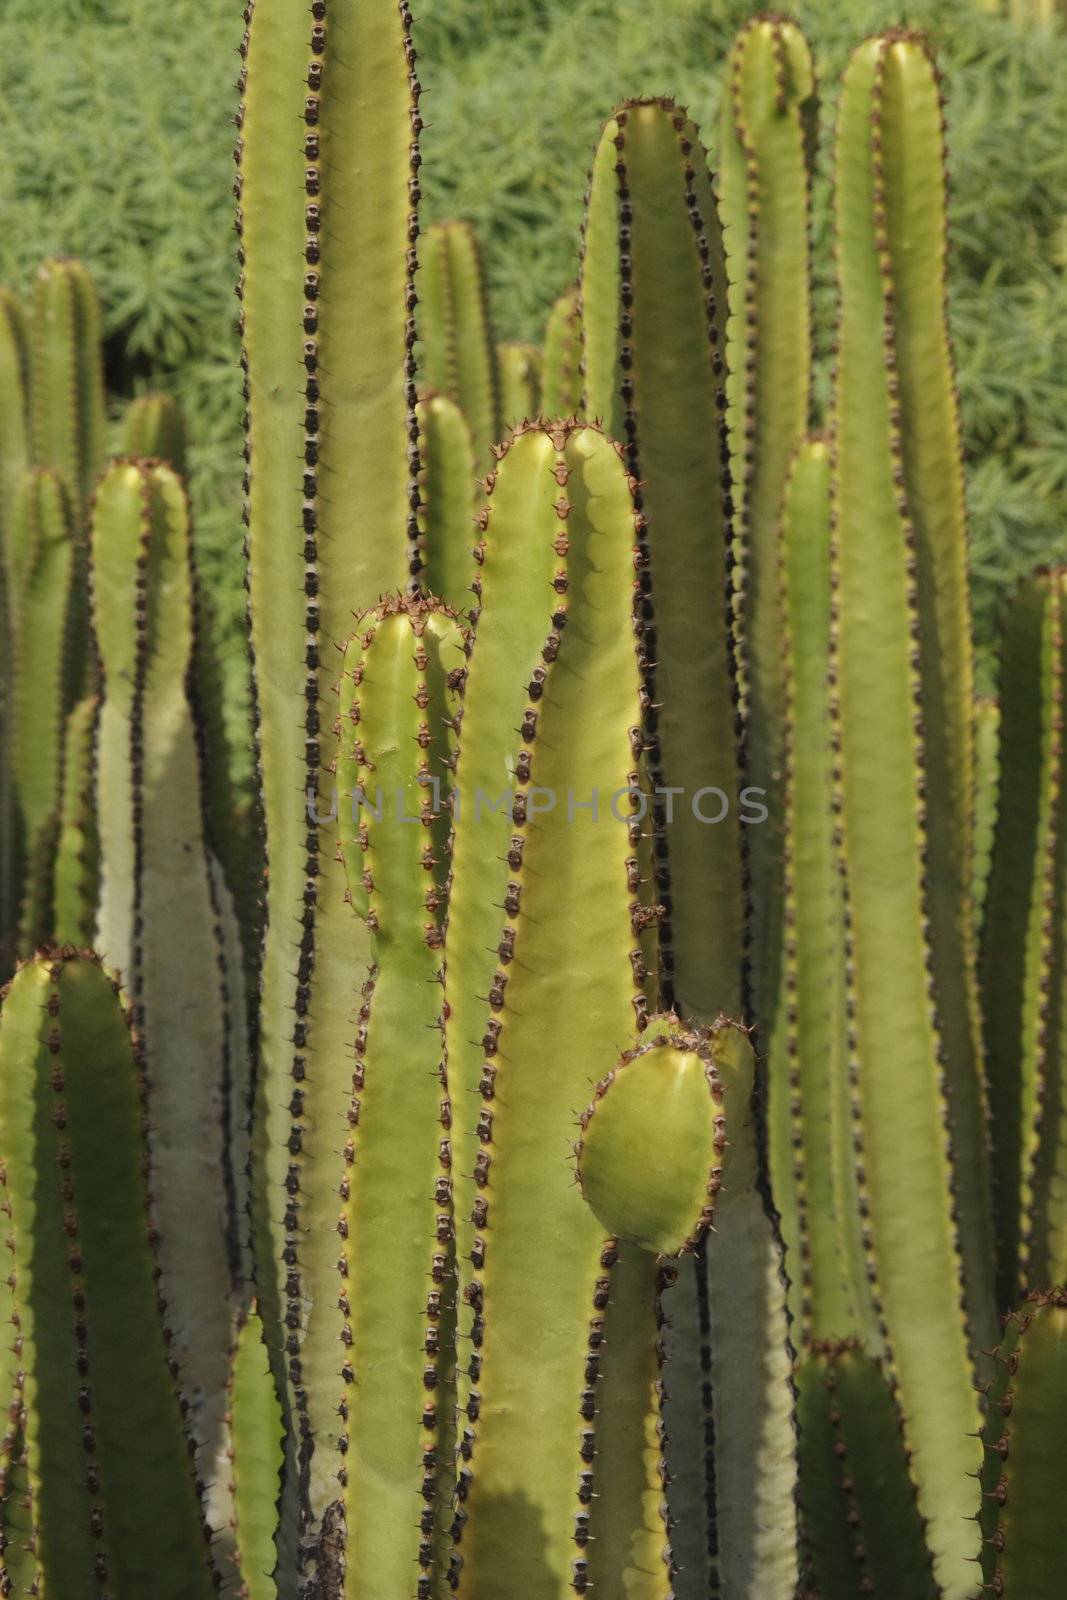 background image of spiky succulent cacti growing close together